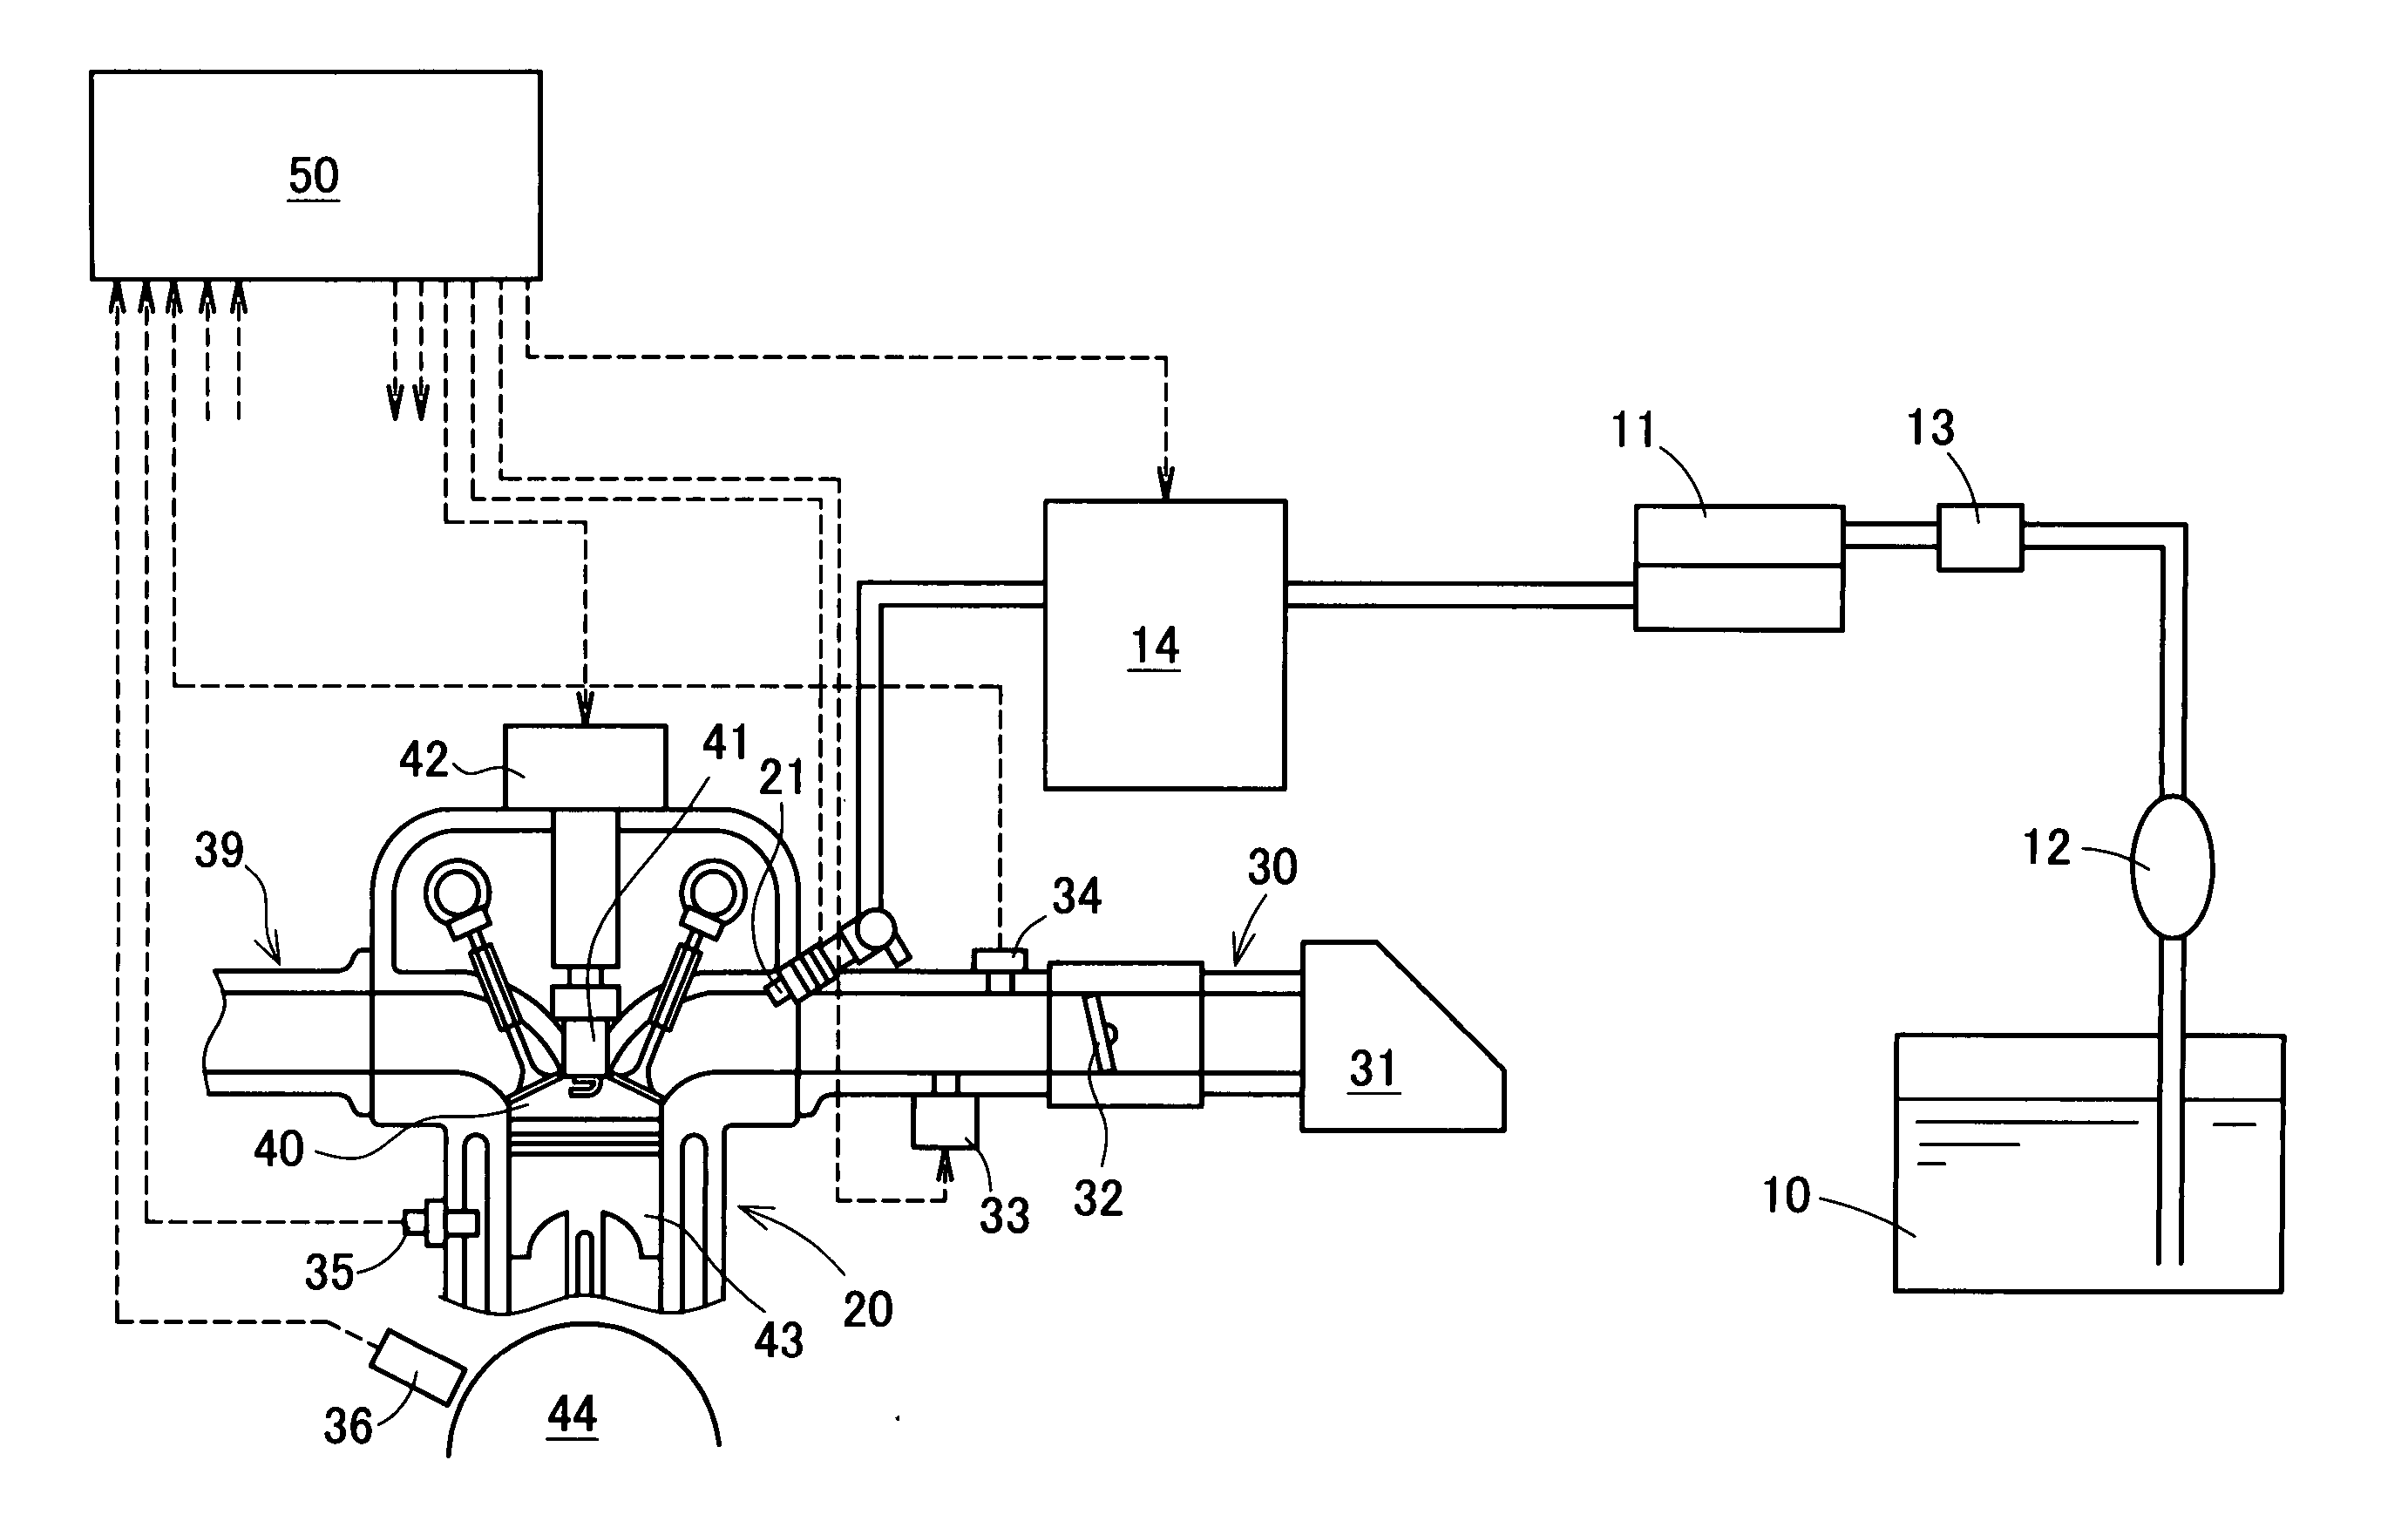 Fuel supply apparatus and vapor separator in outboard engine